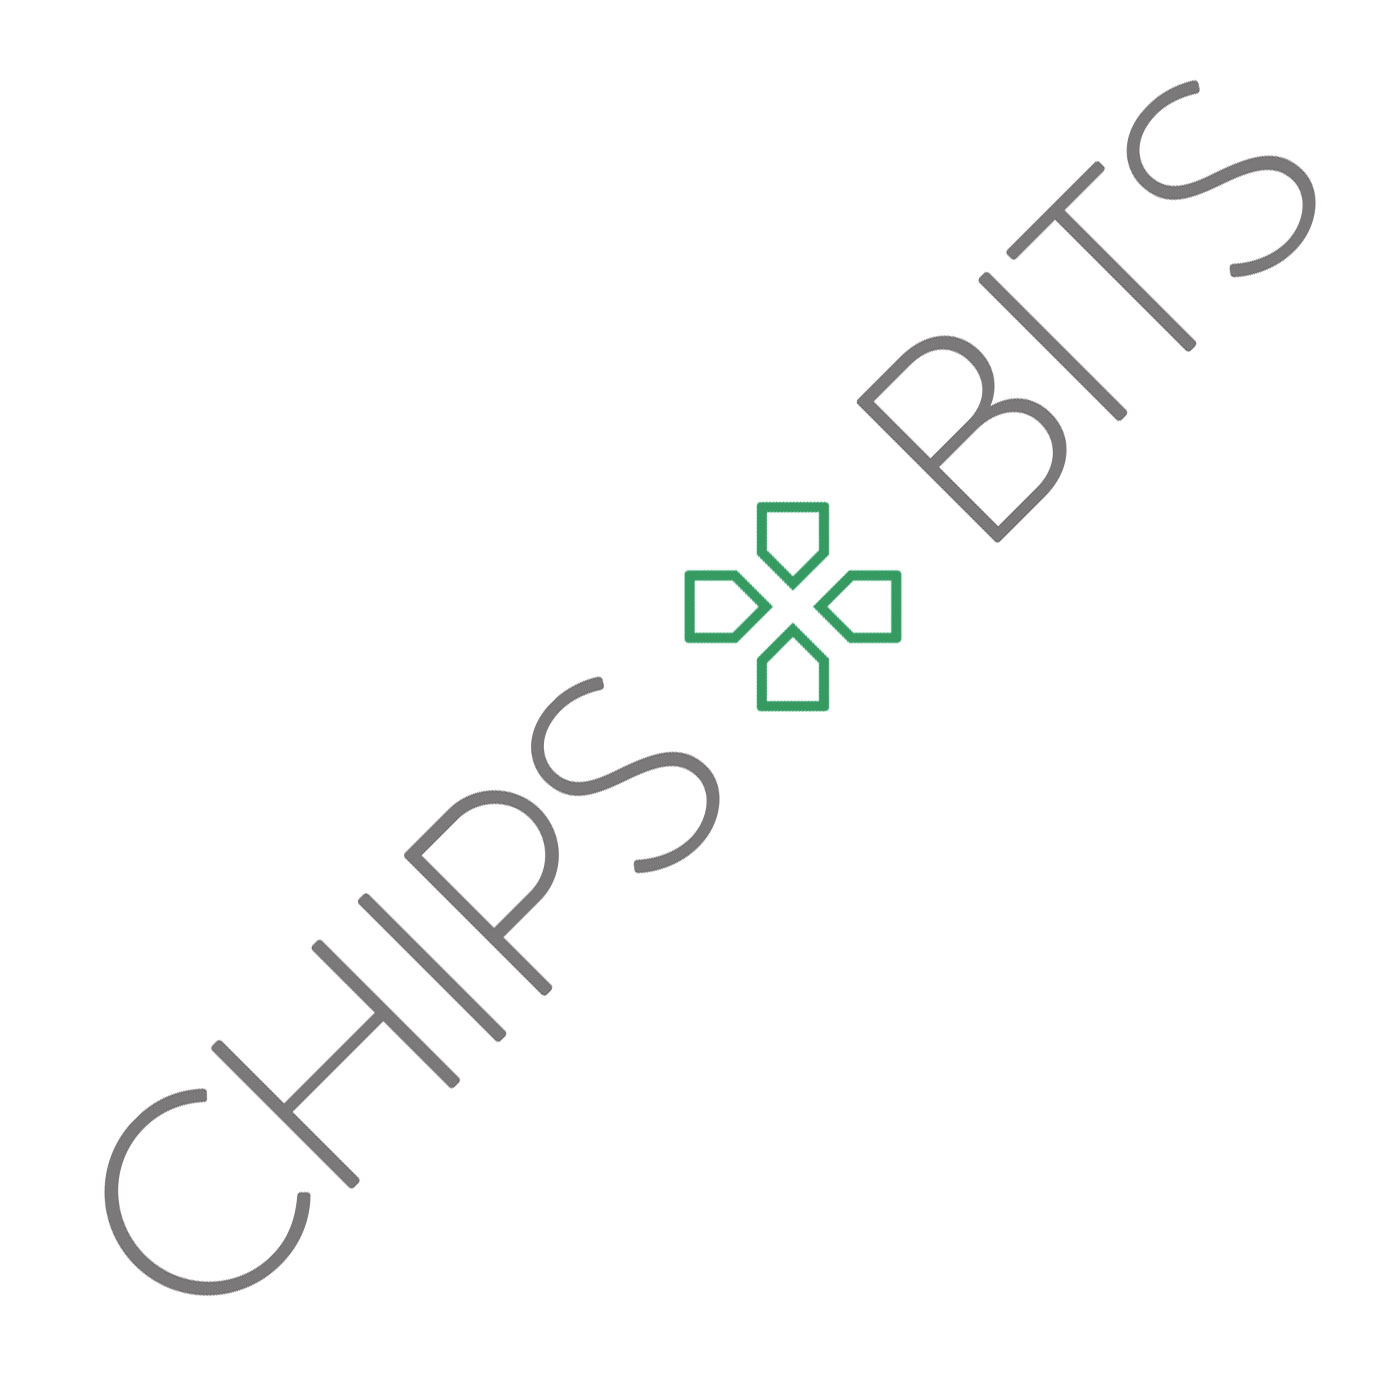 (c) Chips-and-bits.com